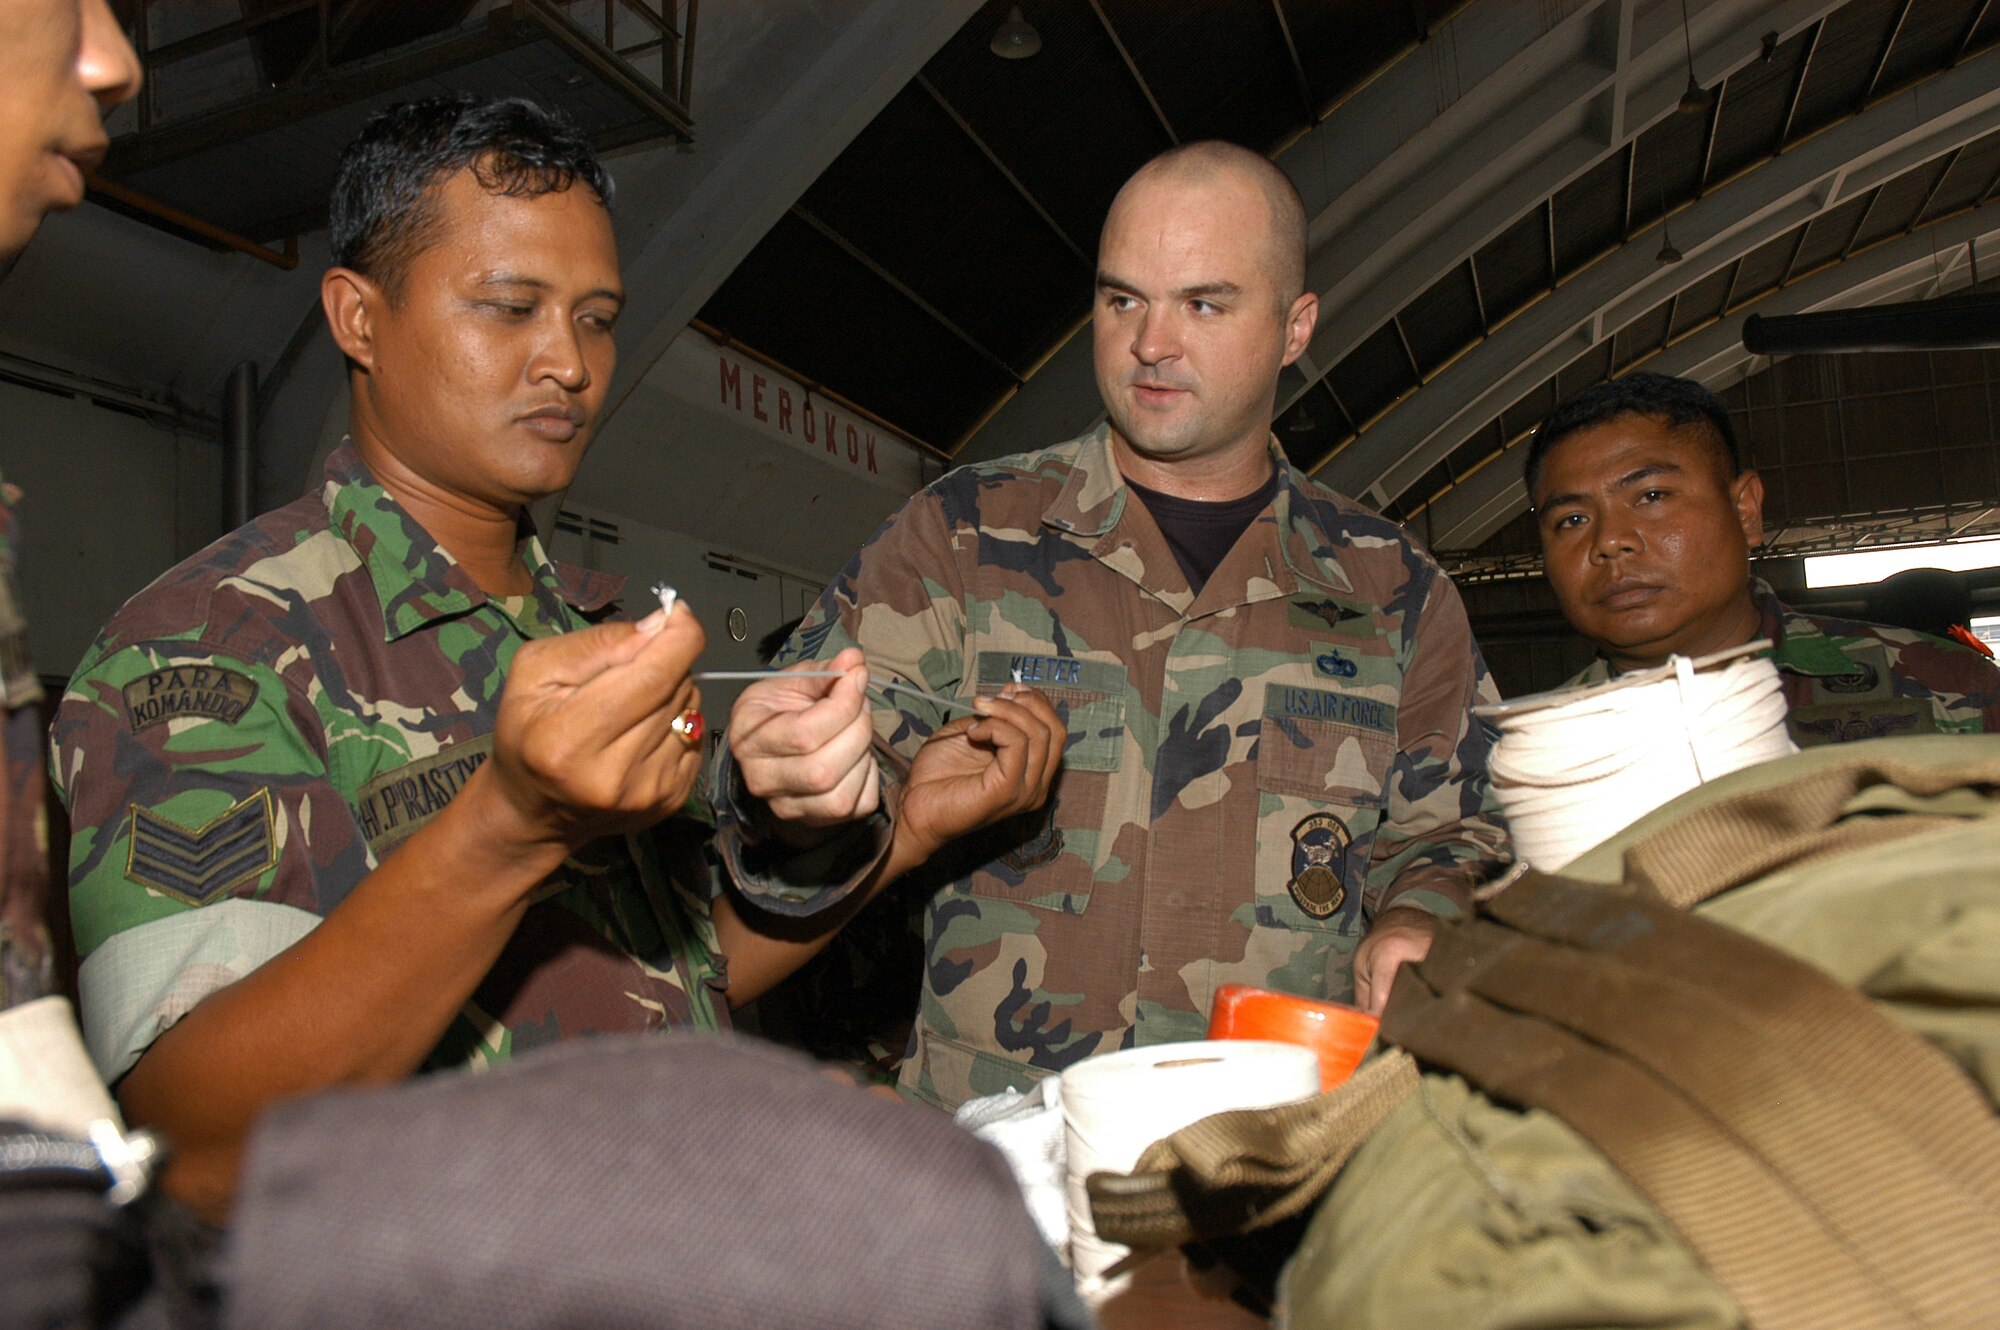 Staff Sgt. Christopher Keeter, a rigger from the Aerial Delivery Branch of the 353rd Operations Support Squadron, based at Kadena AB, Japan, gives members of the Indonesian Air Force a chance to take a closer look at different gauges of string used for tying bundles and parachutes for airdrops.  The exchange was part of Exercise Teak Iron, held at Halim and Bandung, Indonesia.
(U.S. Air Force photo/Master Sgt. Marilyn C. Holliday)
   